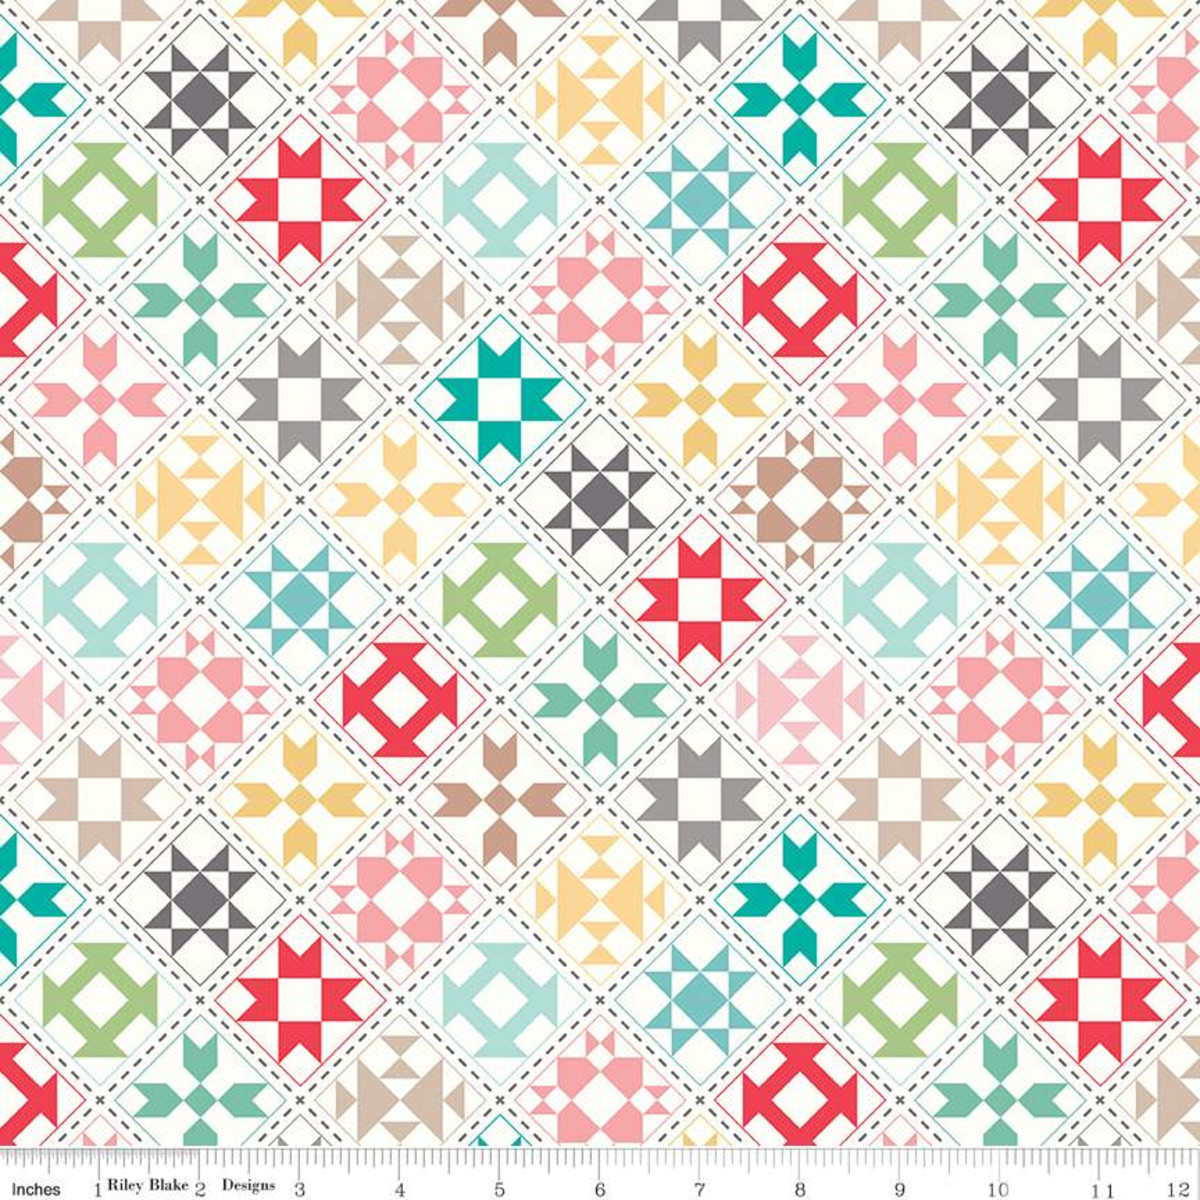 MY HAPPY PLACE Home Décor Quilt Blocks - by Lori Holt